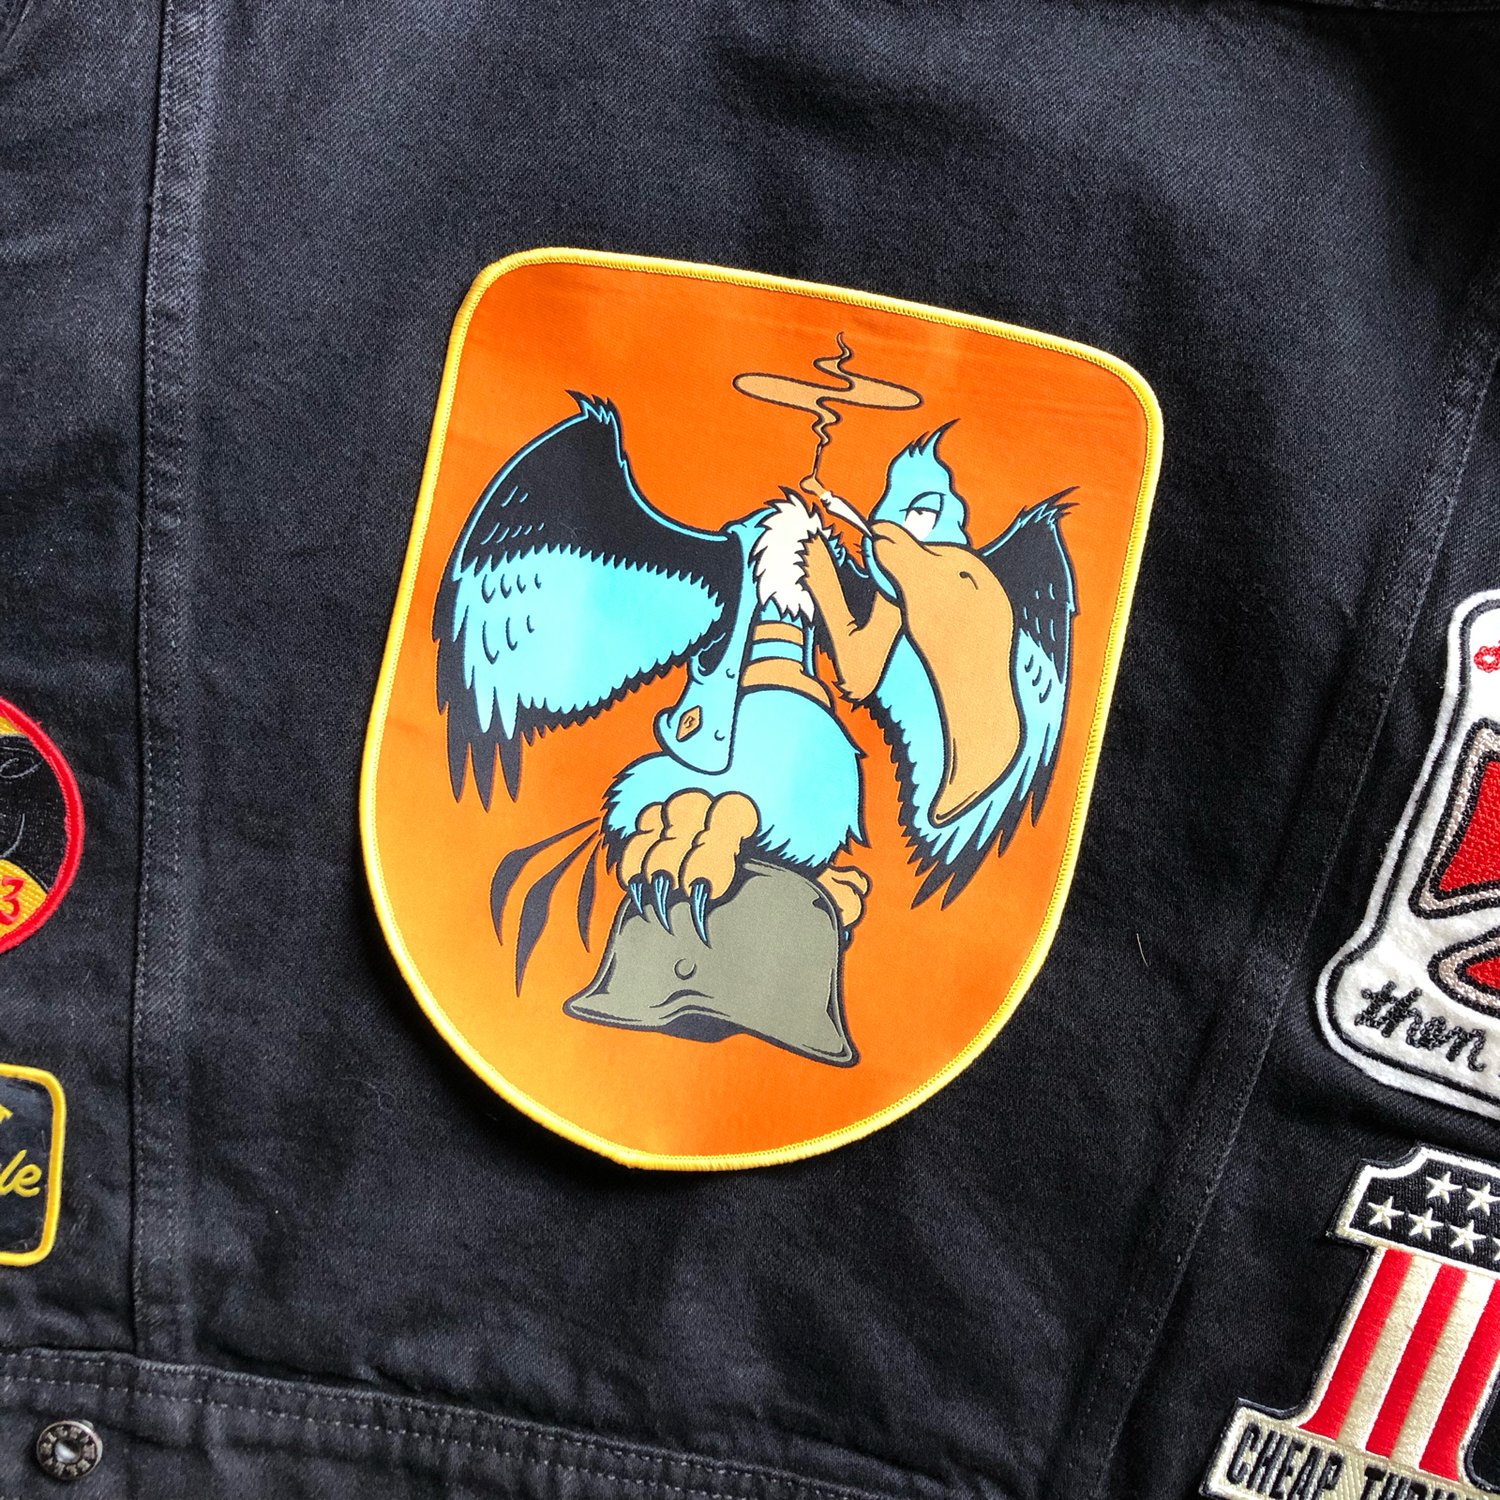 Image of WarBuzz back patch